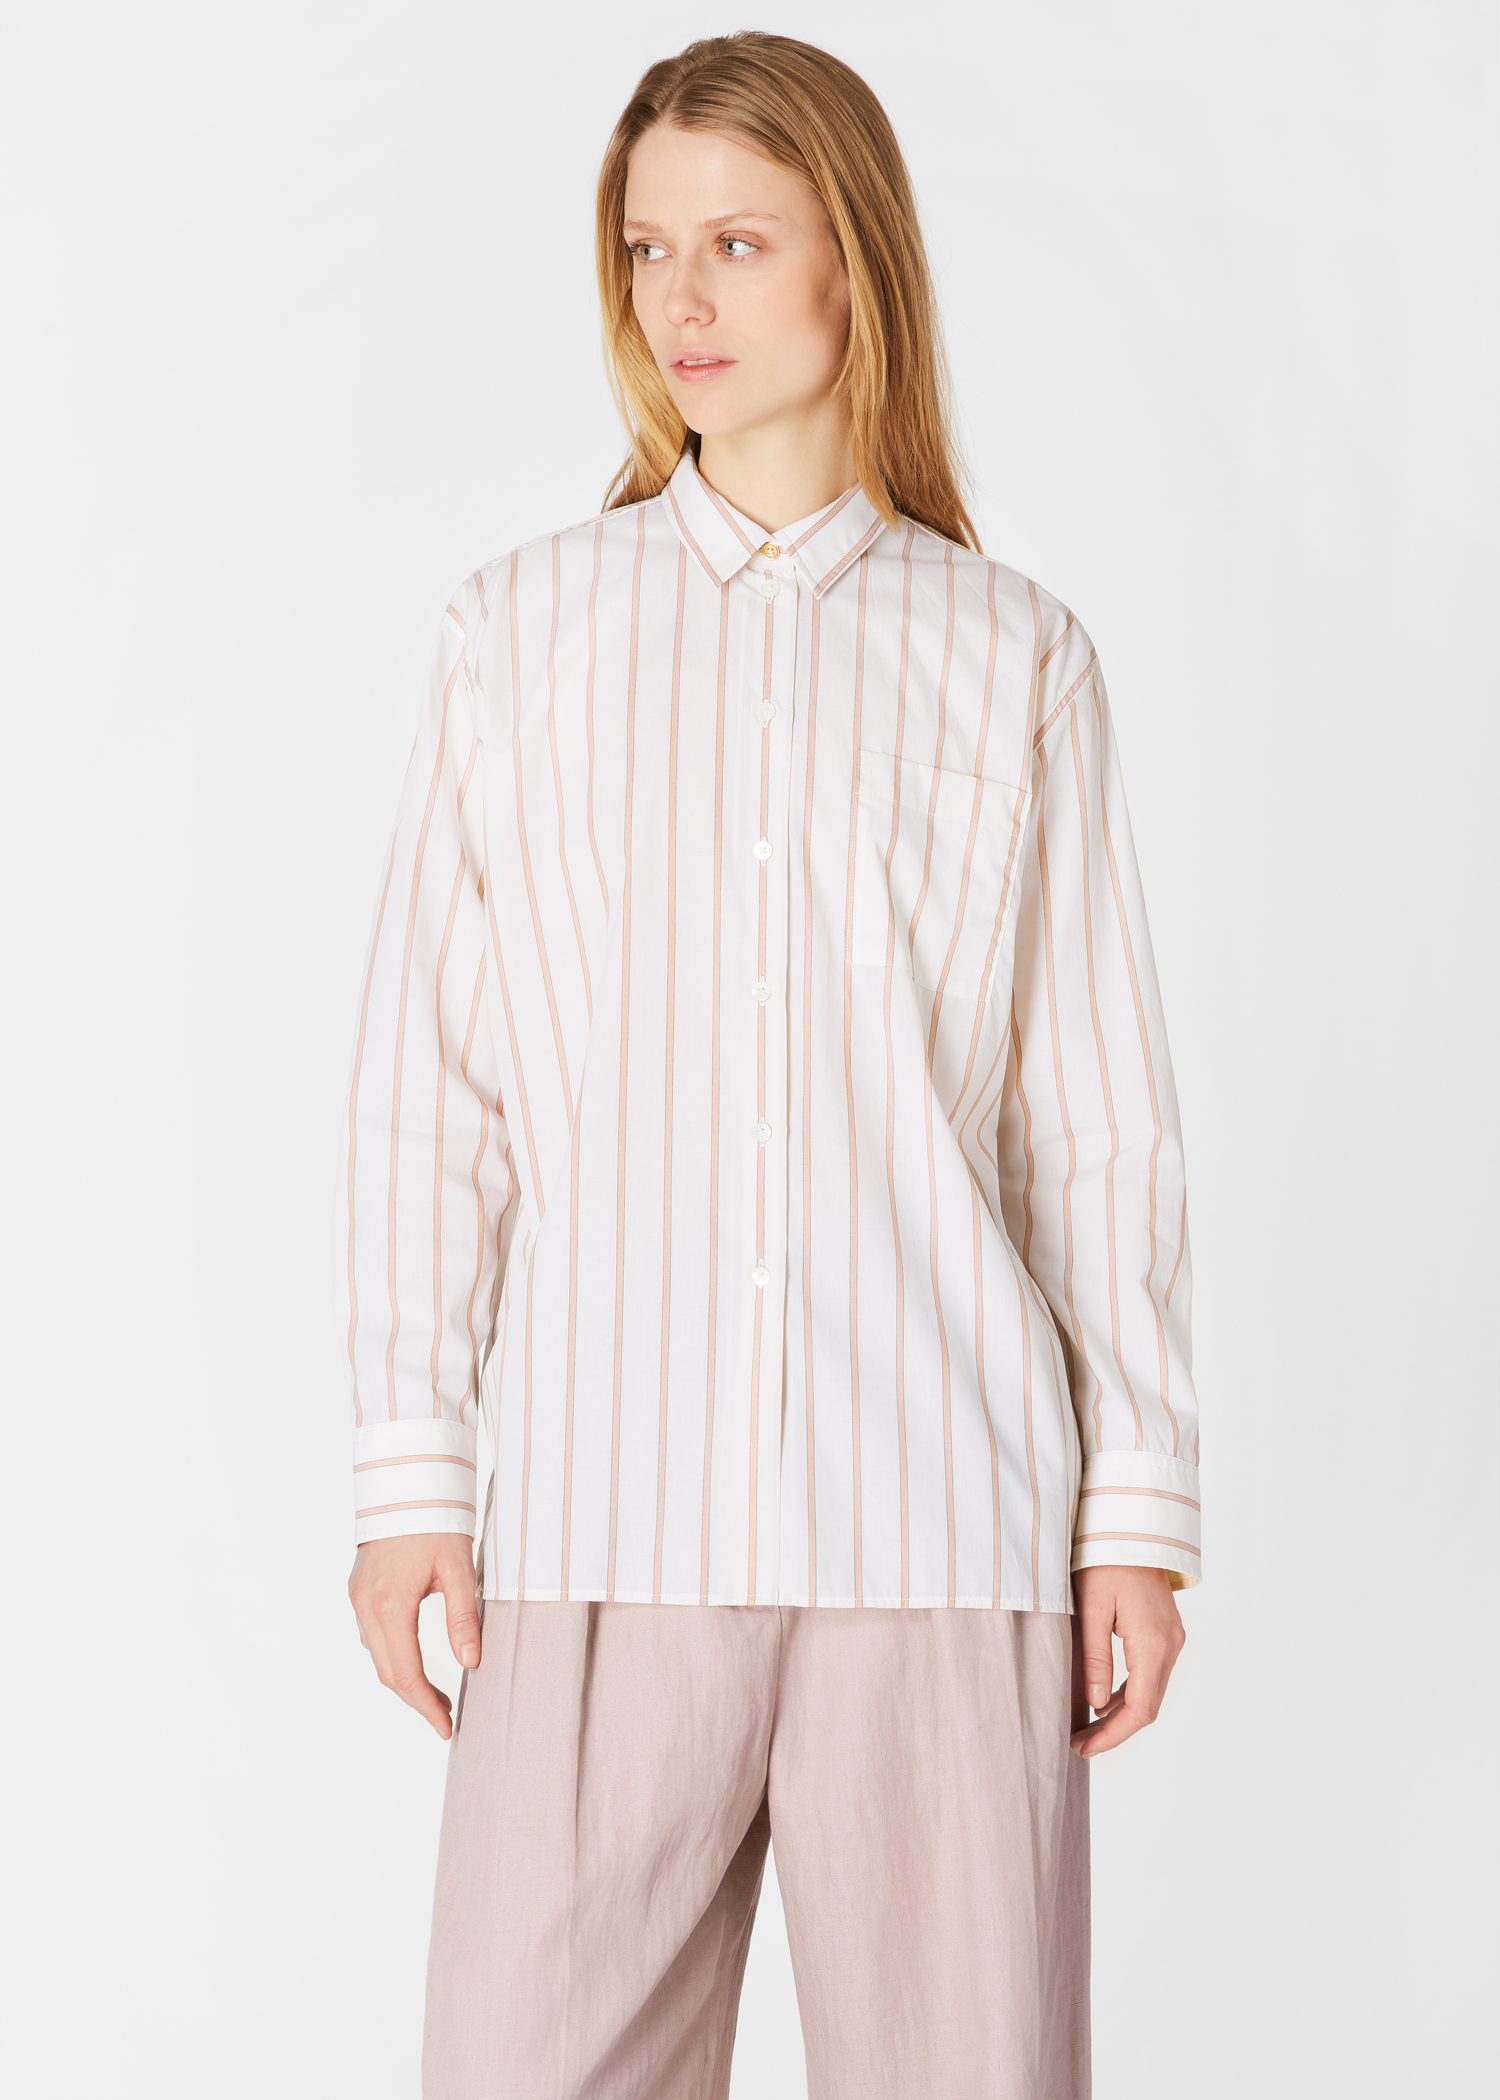 Model front close up - Women's Cream And Beige Stripe Cotton Shirt Paul Smith